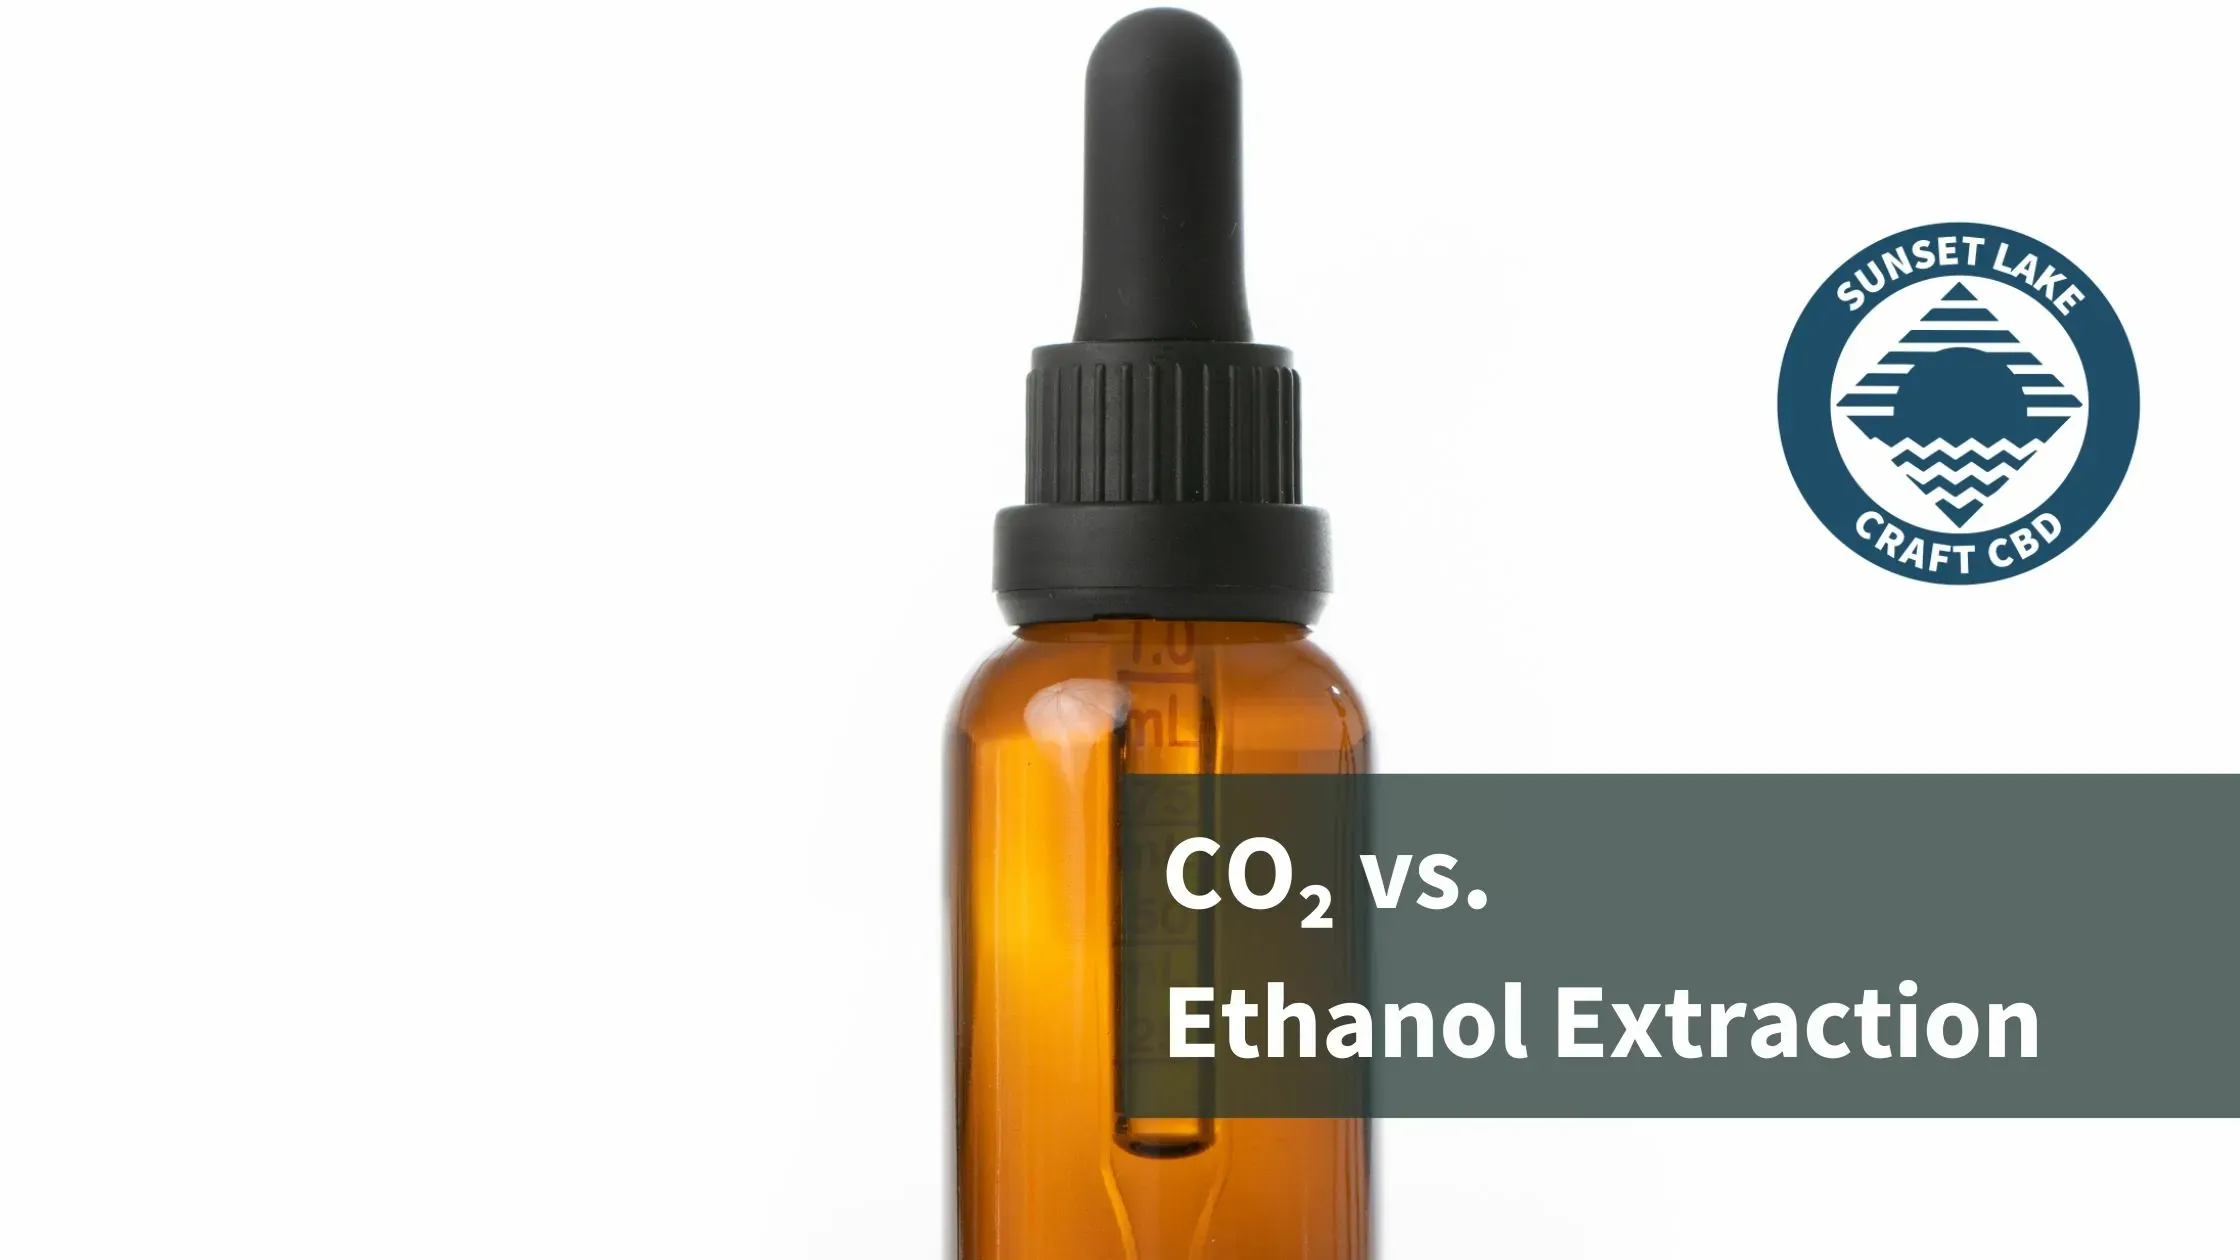 Blank tincture with text "CO₂ vs. Ethanol Extraction"